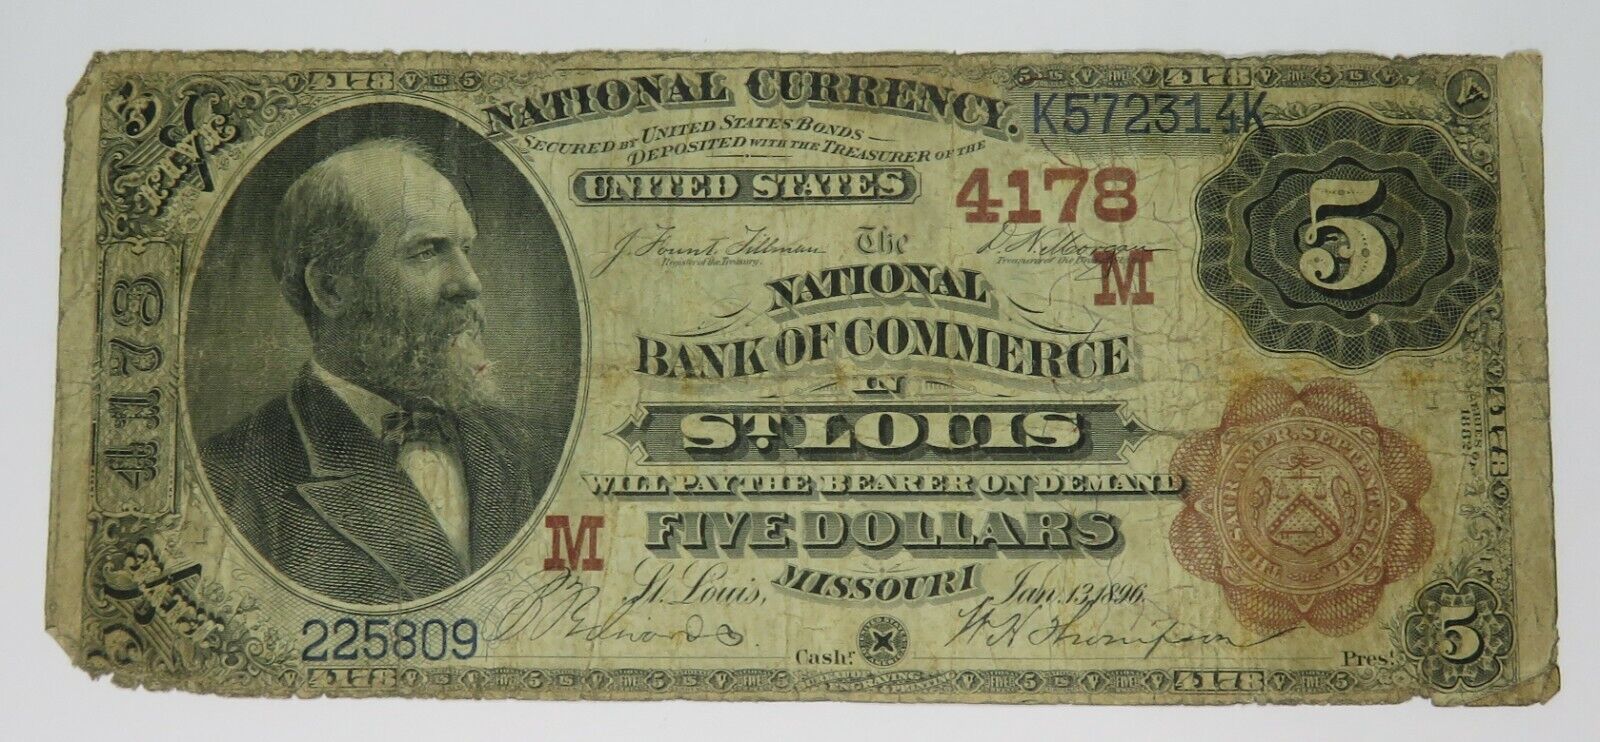 1896 $5 Charter 4178 Missouri St. Louis Fr 474 Us Currency Note Item #28674f